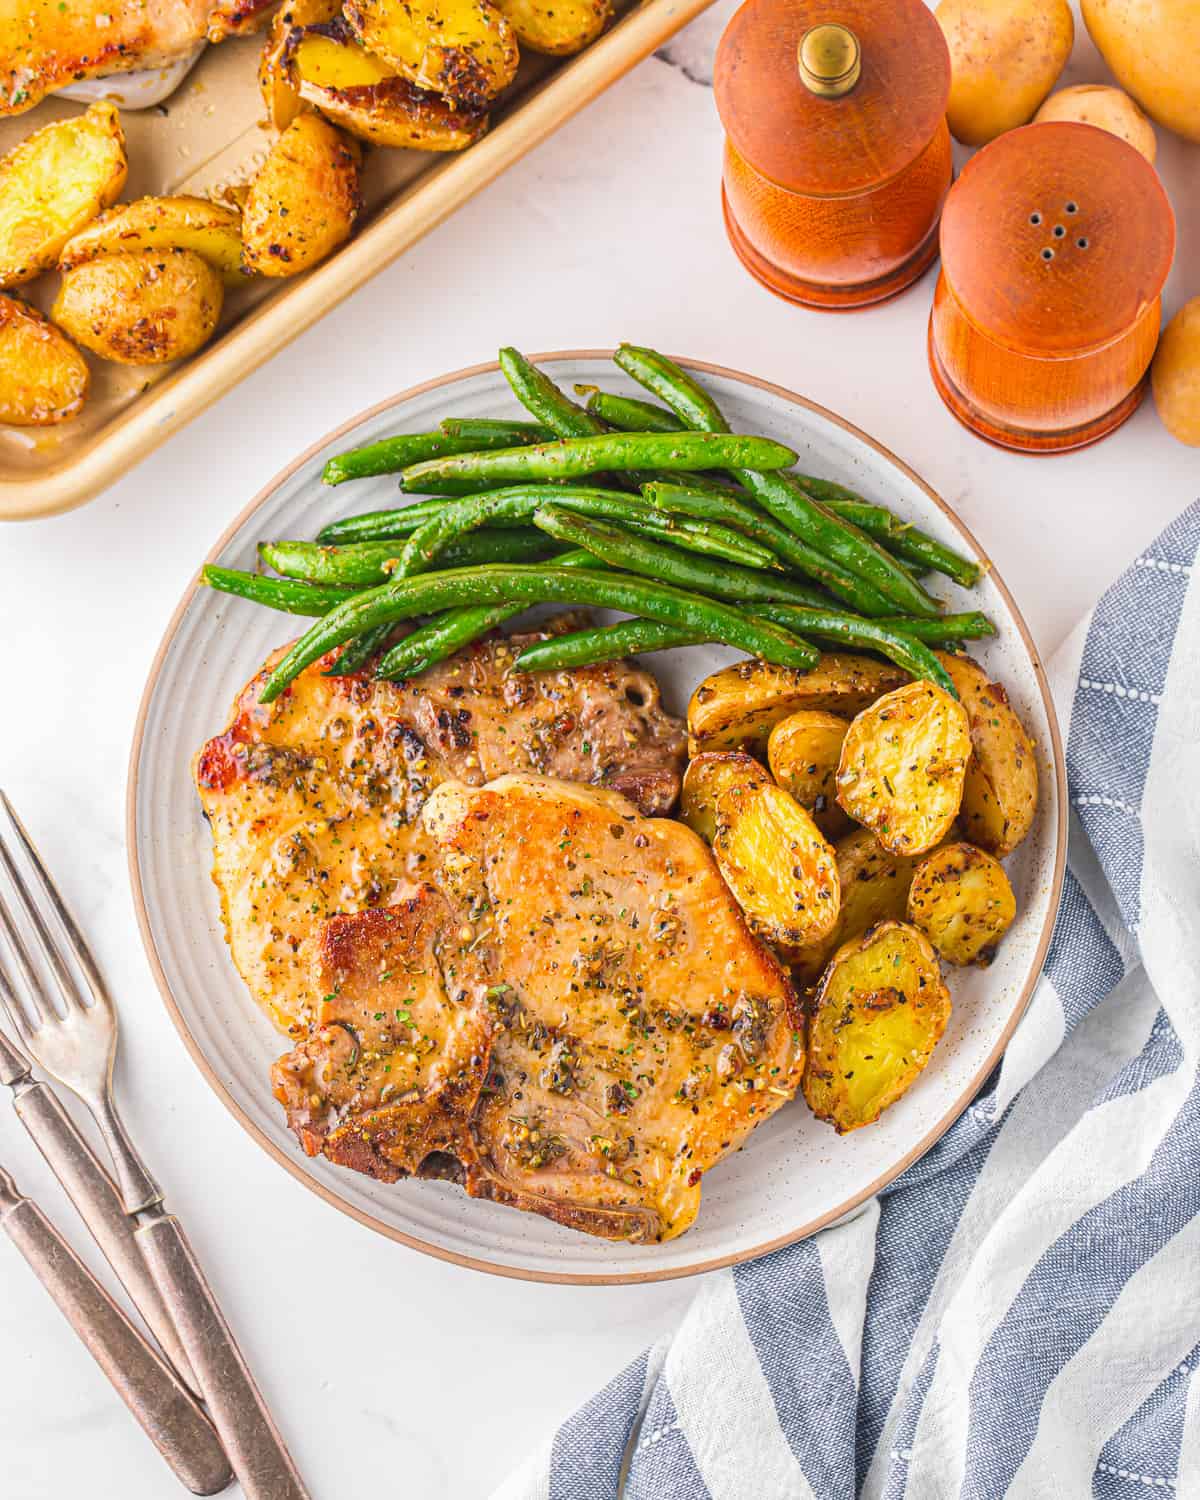 A plate of pork chops, green beans, and potatoes.